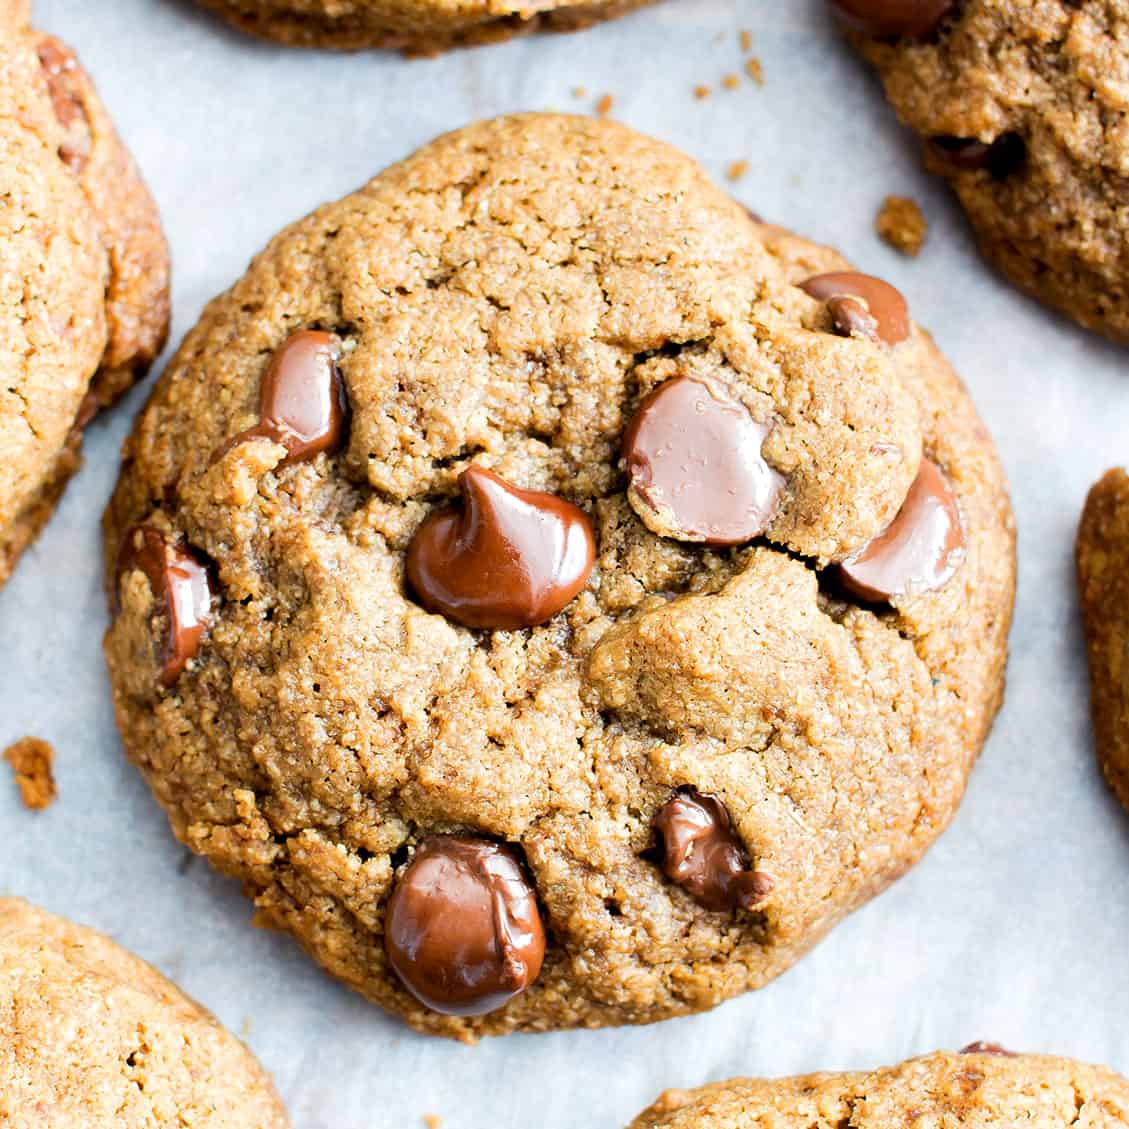 fresh-baked classic vegan gluten free chocolate chip cookies on parchment paper